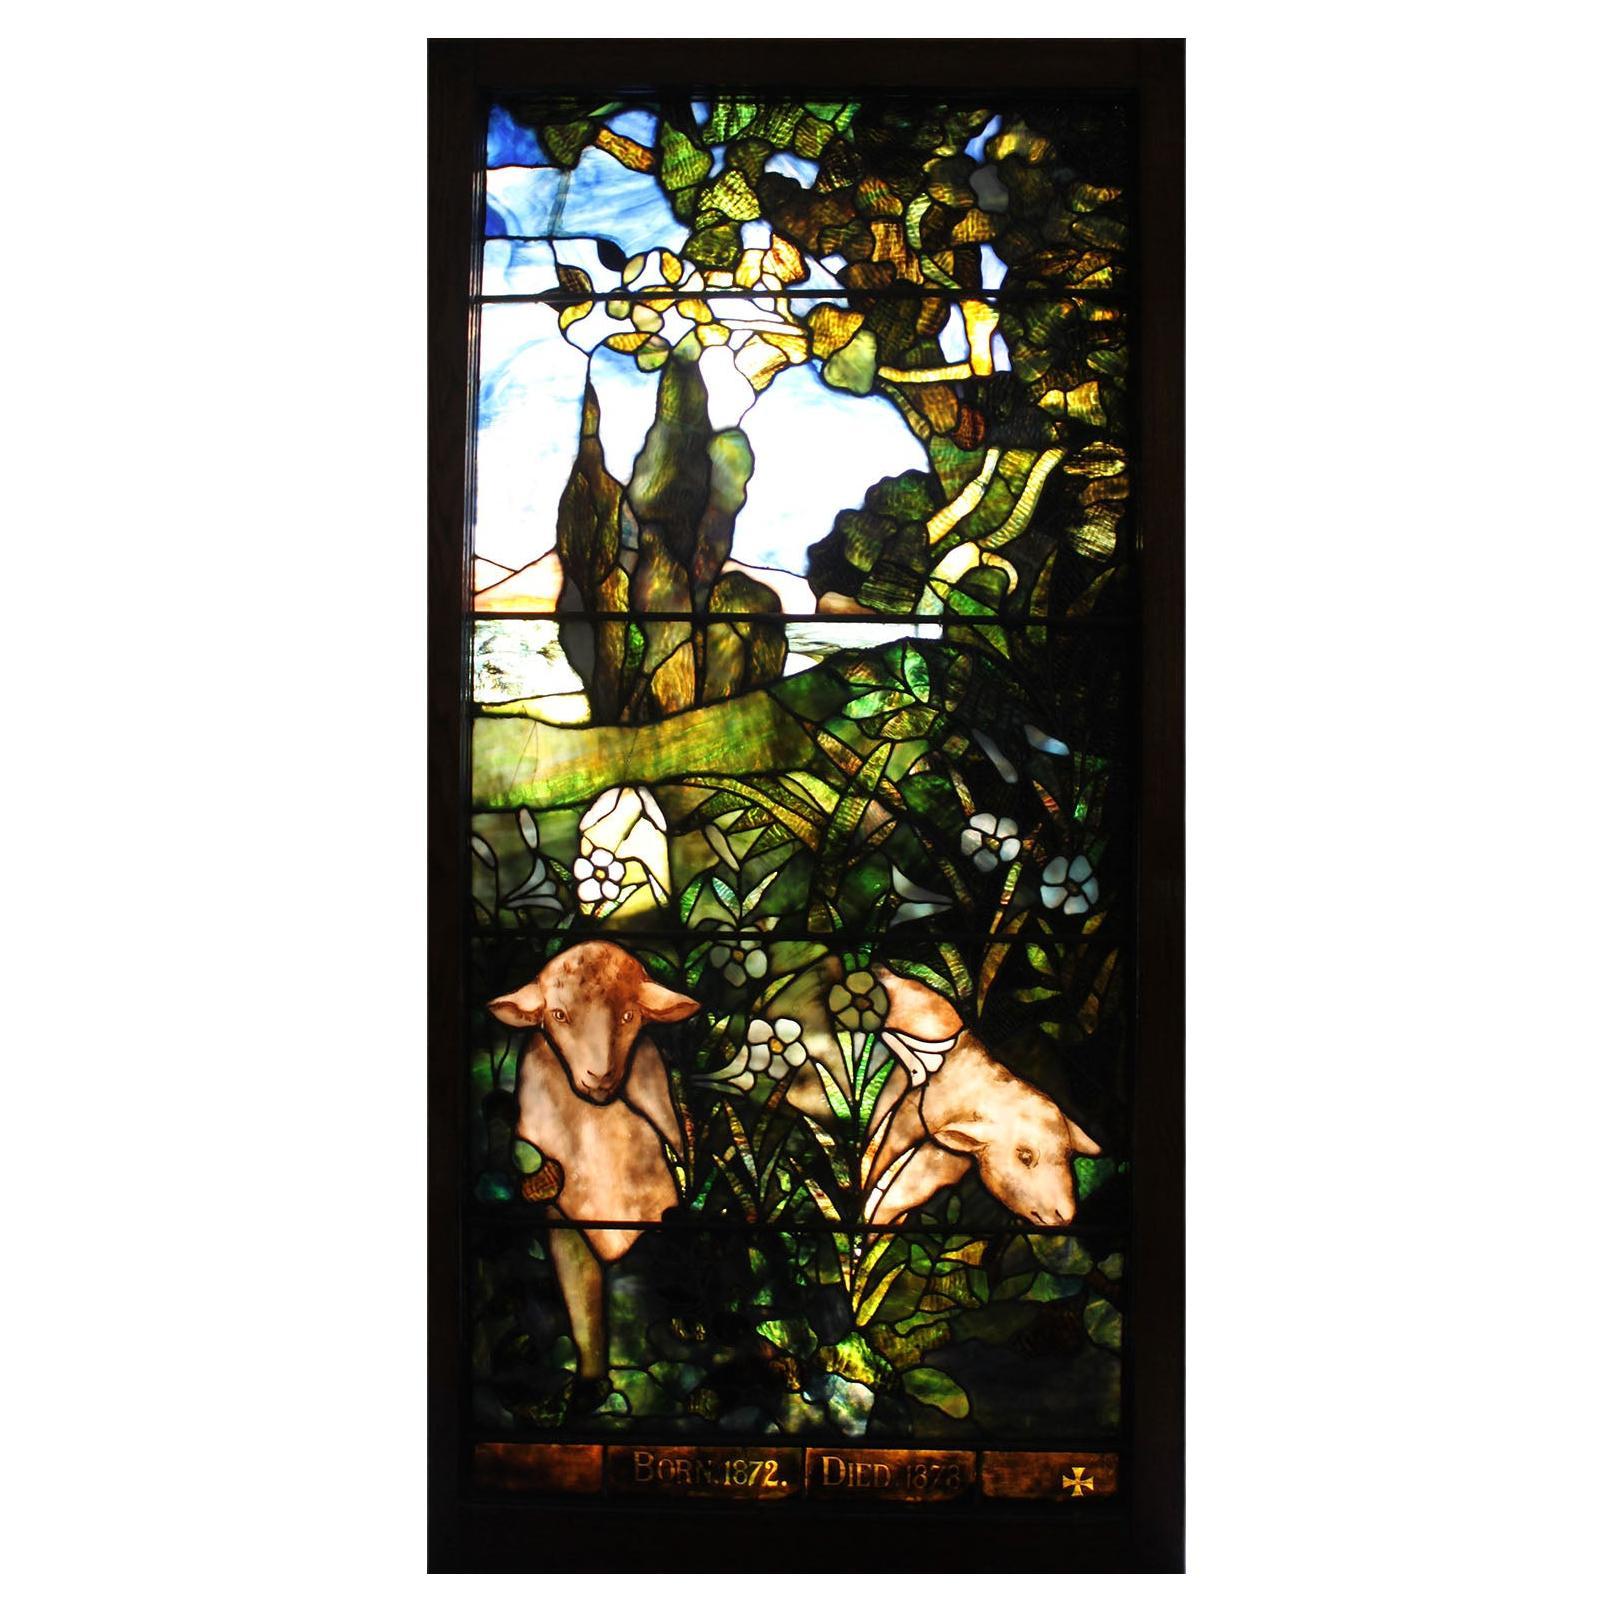 Is stained glass Art Nouveau?